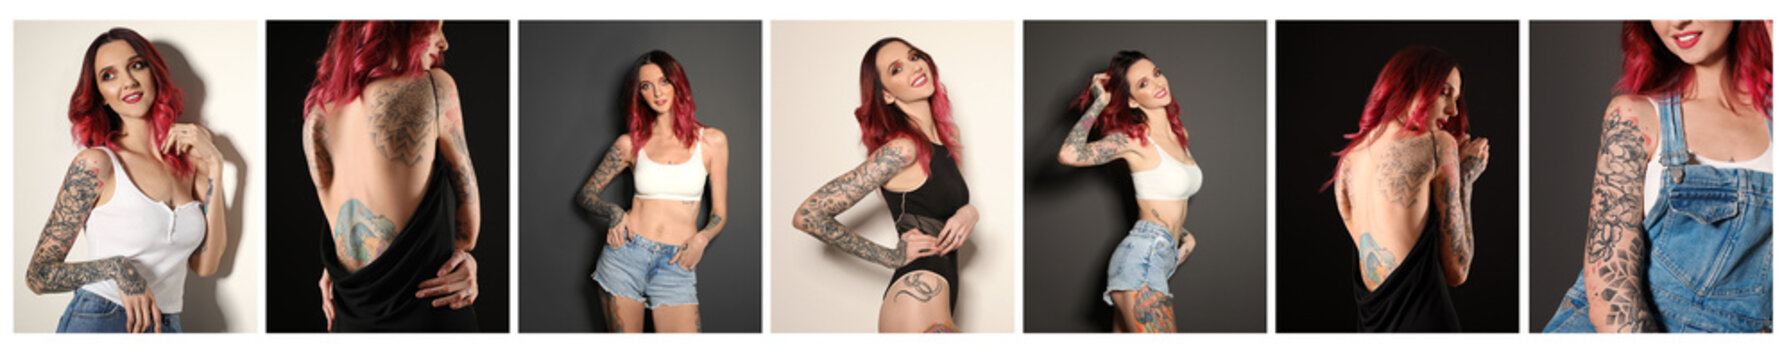 Collage with photos of beautiful woman with tattoos on body. Banner design